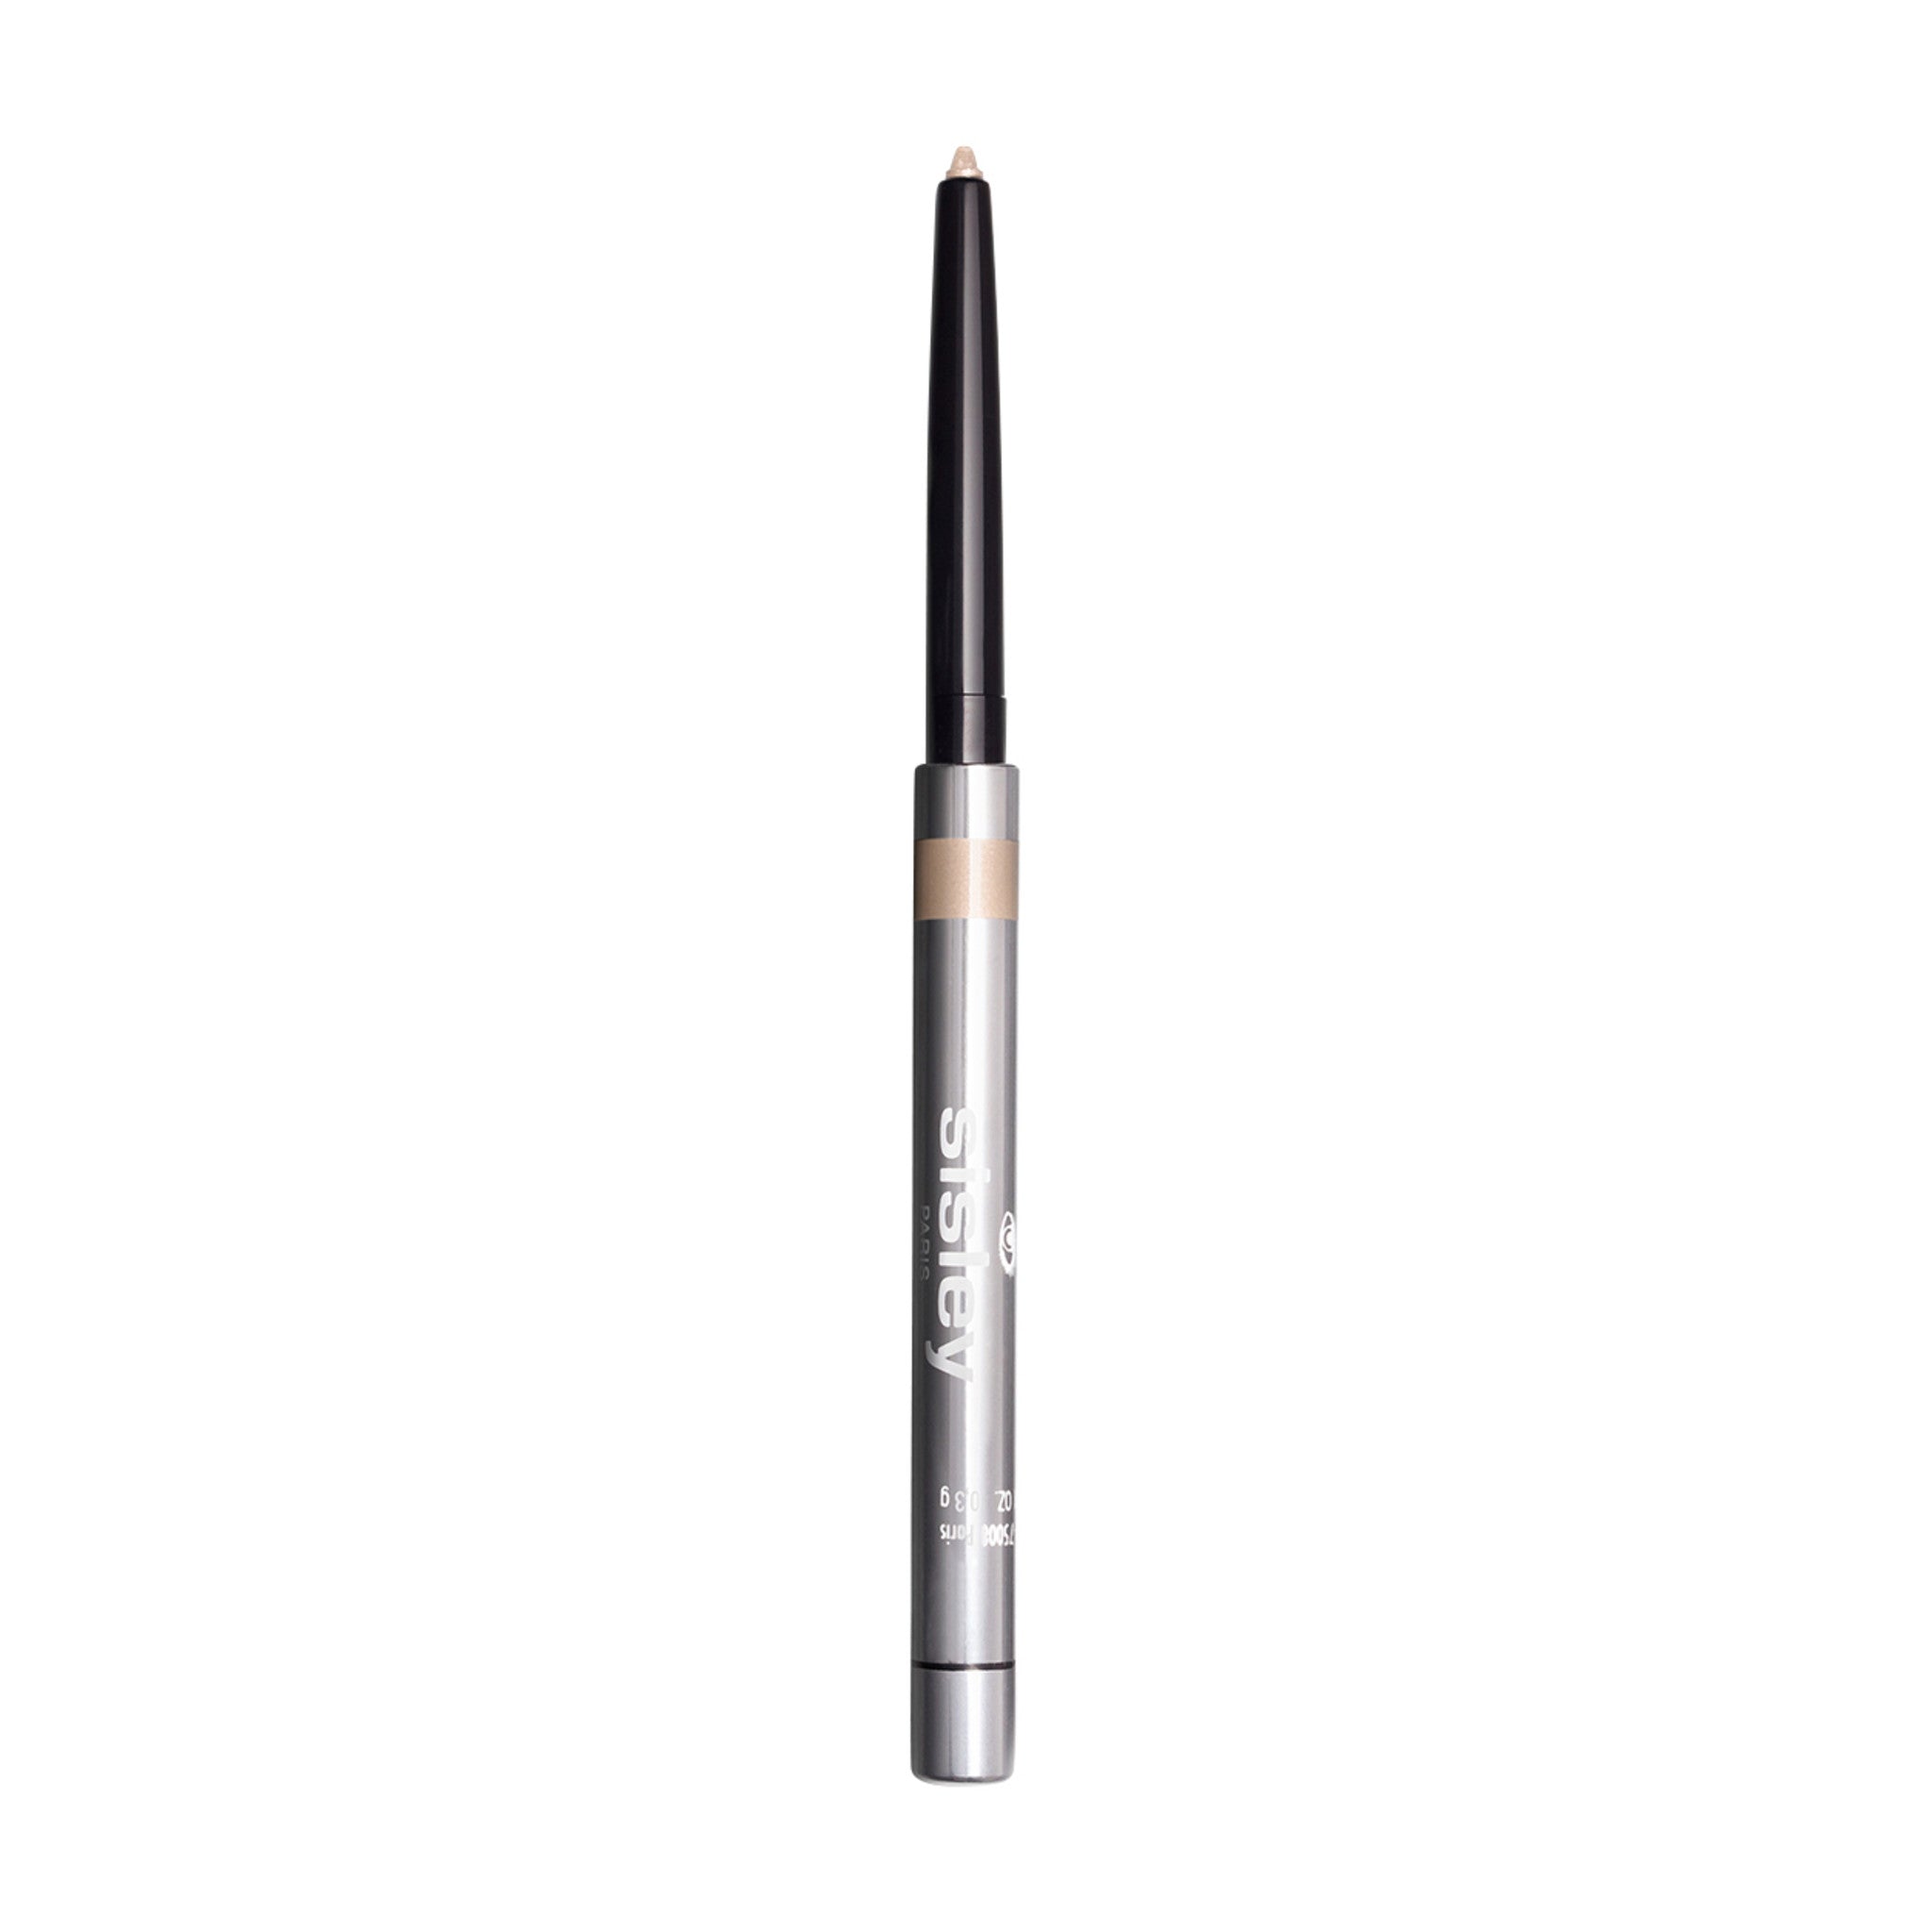 Sisley-Paris Phyto-Khol Star Waterproof Eye Pencil Color/Shade variant: 9 Sparkling Pearl main image. This product is in the color nude